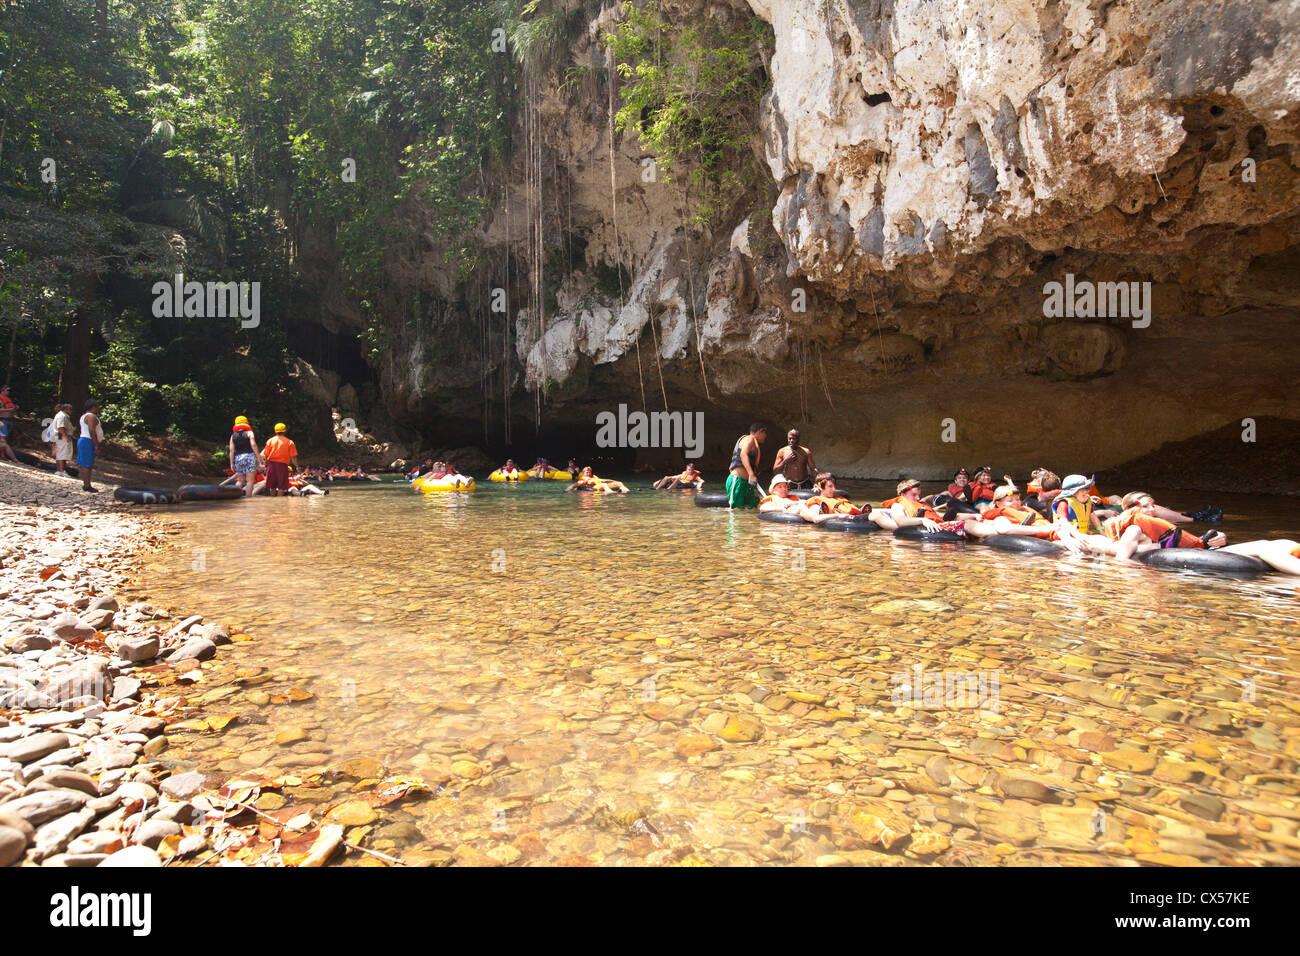 Tourist wave and river tubing in the Cayo District in Central America, Belize. Stock Photo